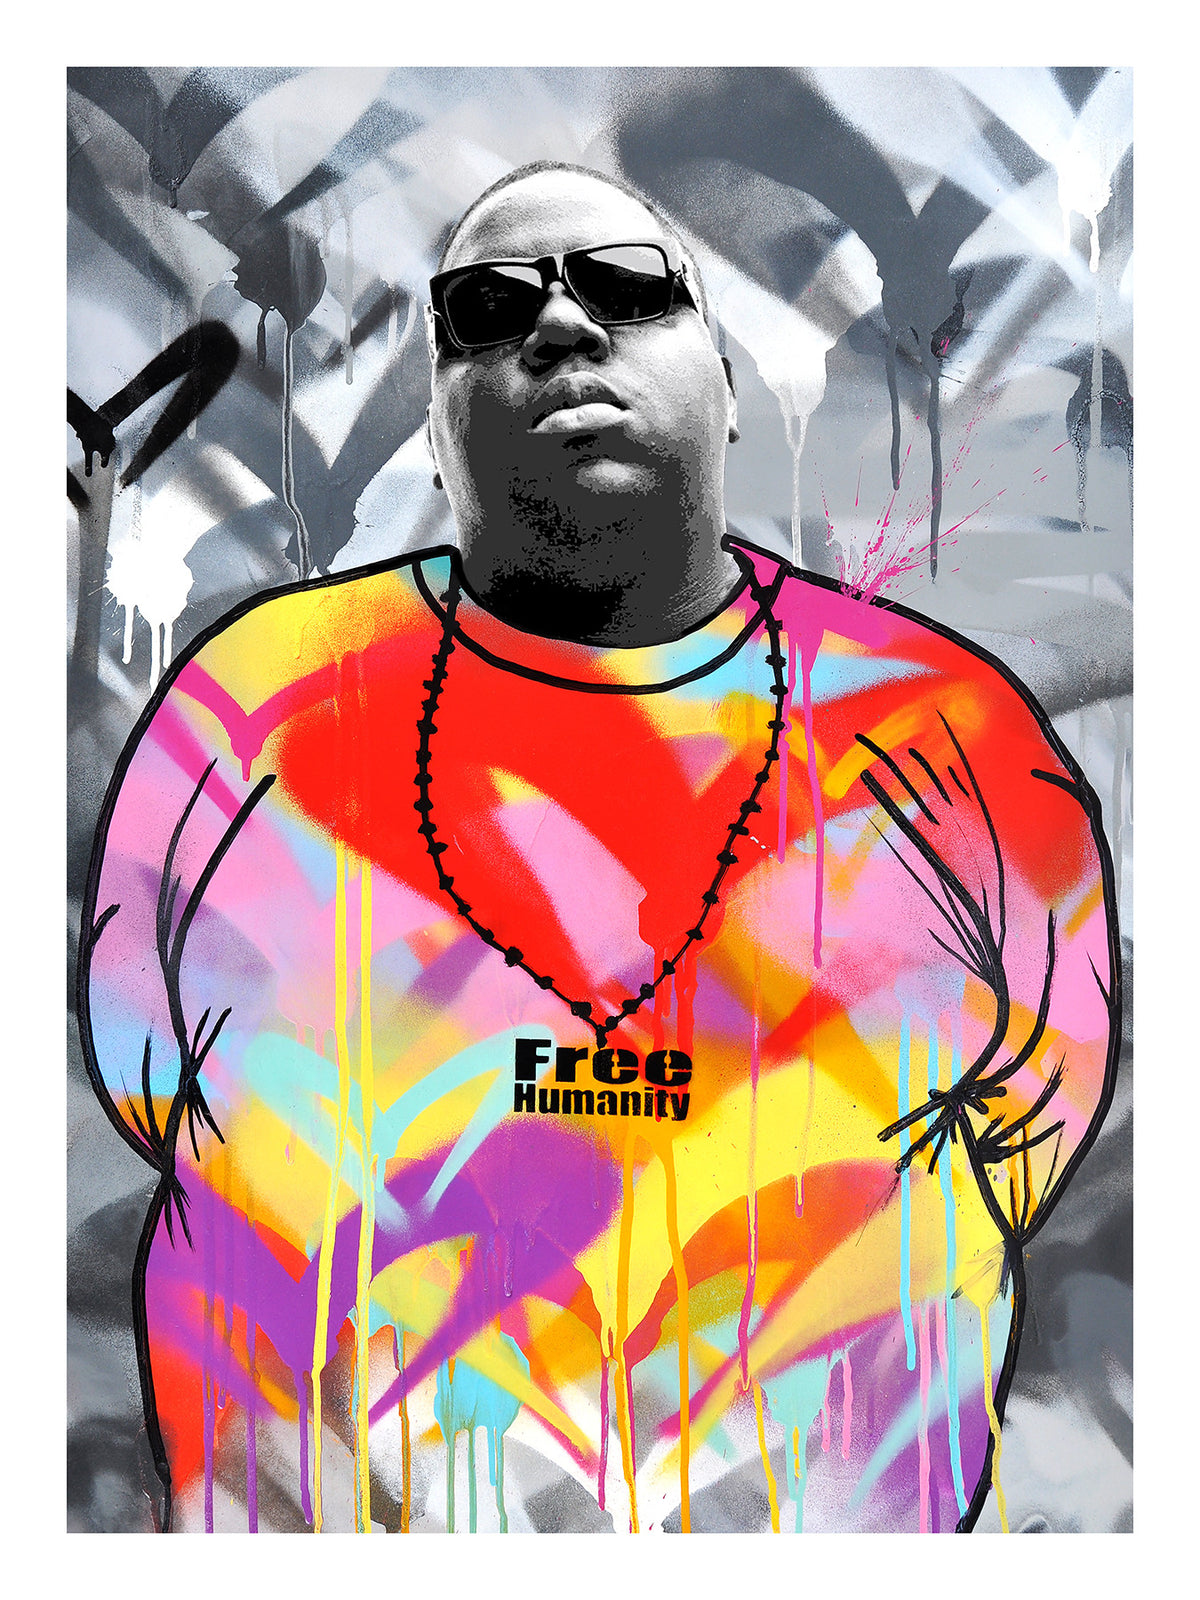 Free Humanity &quot;Notorious B.I.G.&quot; - 2 x Vinyl Stickers